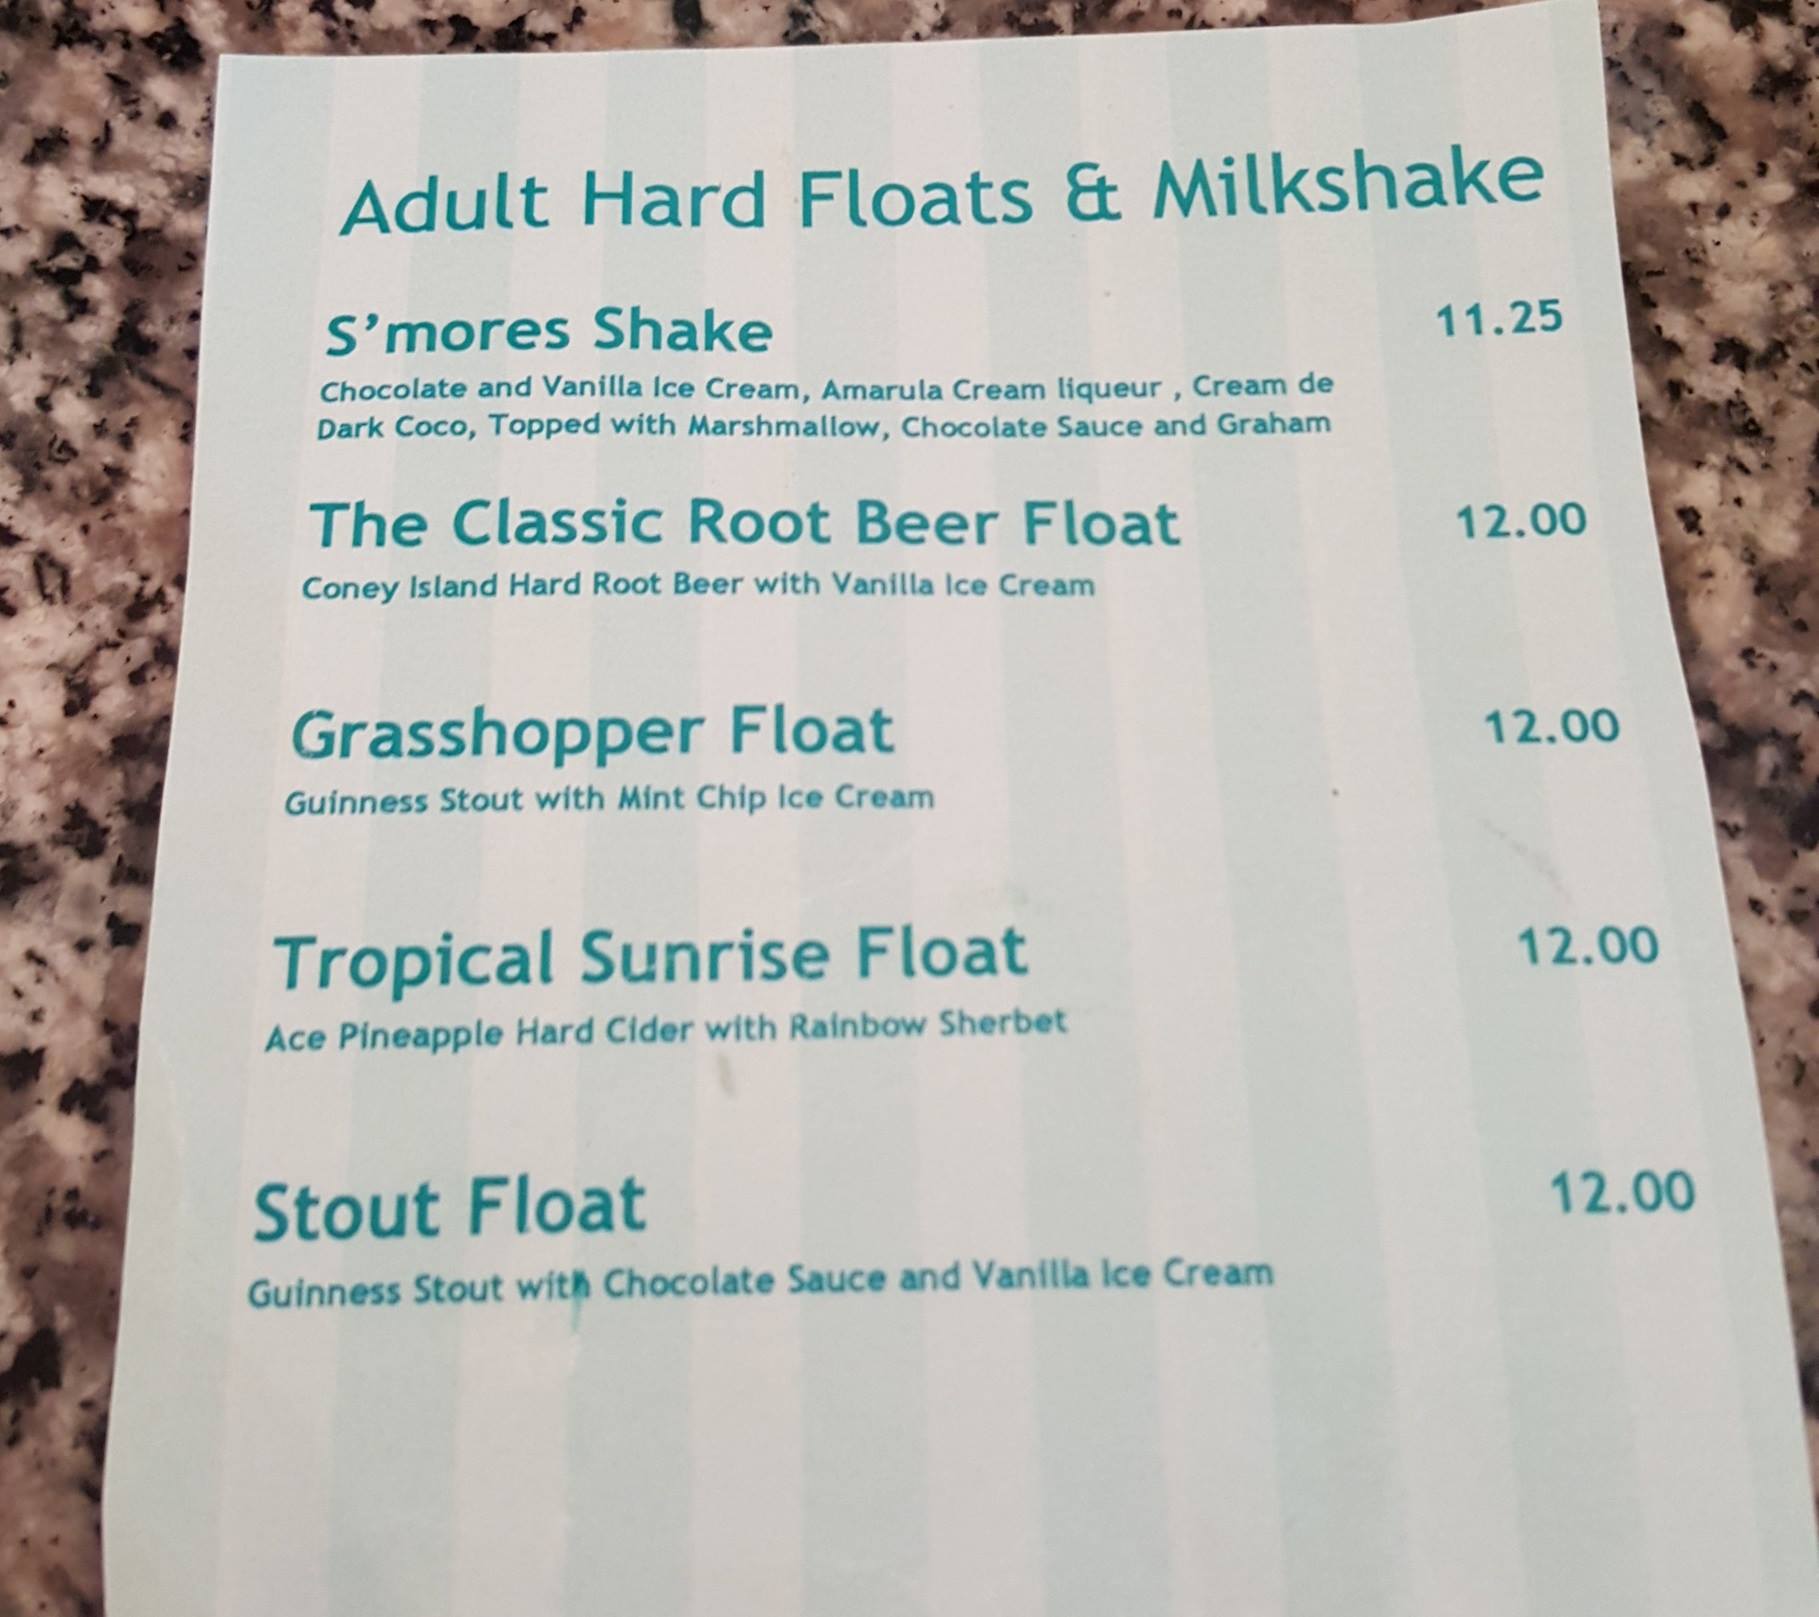 Beaches and Cream now offering alcoholic Floats and Shakes